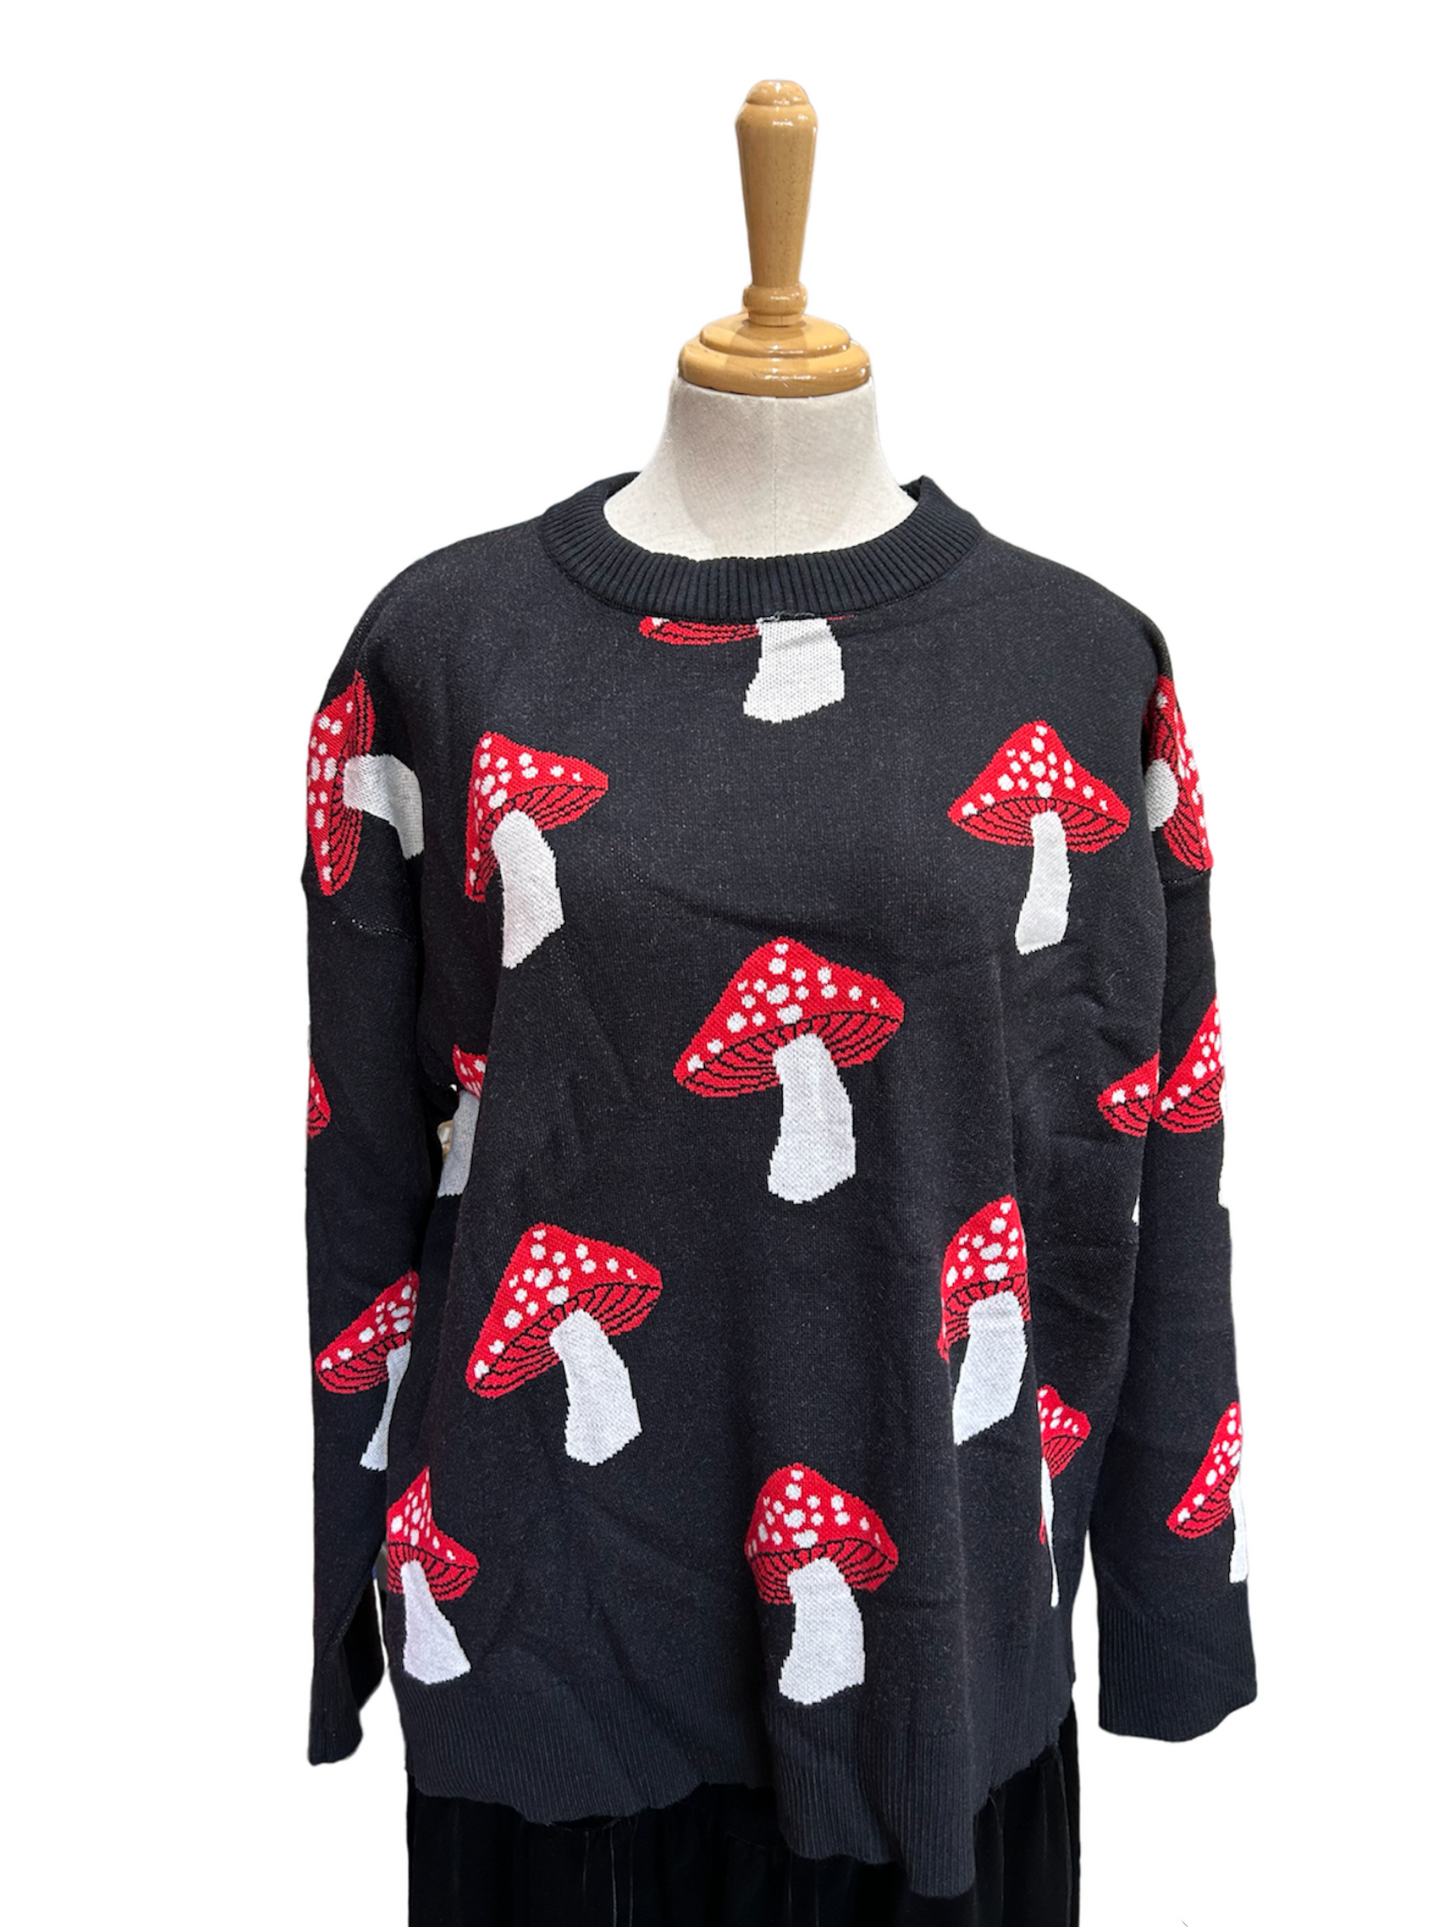 Mushroom pullover 2 colours available(oversized)